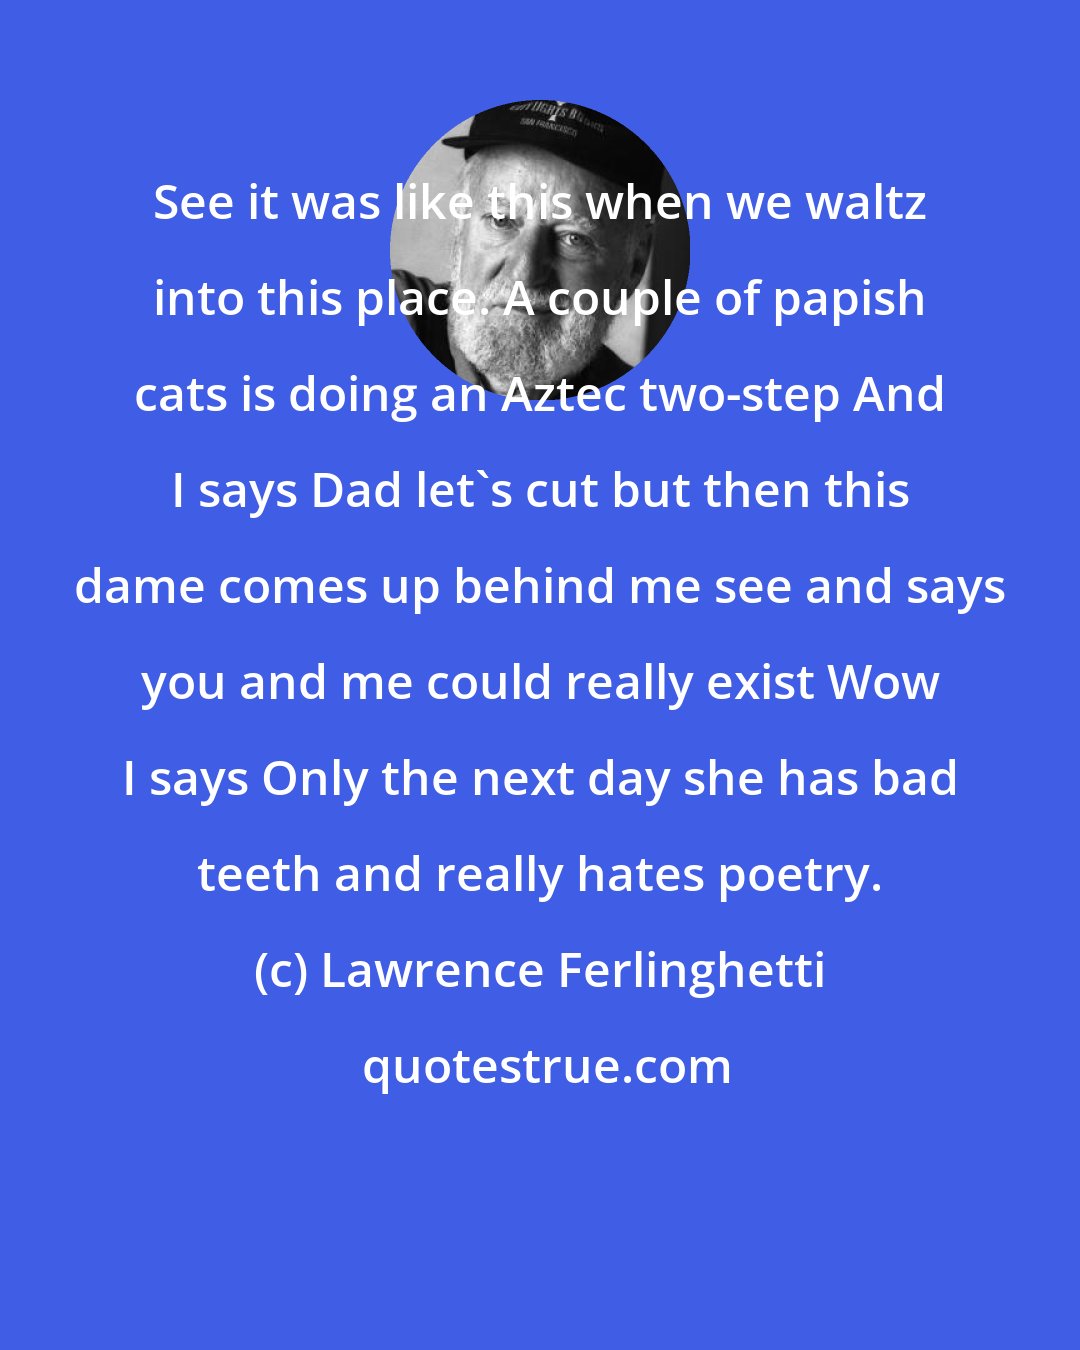 Lawrence Ferlinghetti: See it was like this when we waltz into this place. A couple of papish cats is doing an Aztec two-step And I says Dad let's cut but then this dame comes up behind me see and says you and me could really exist Wow I says Only the next day she has bad teeth and really hates poetry.